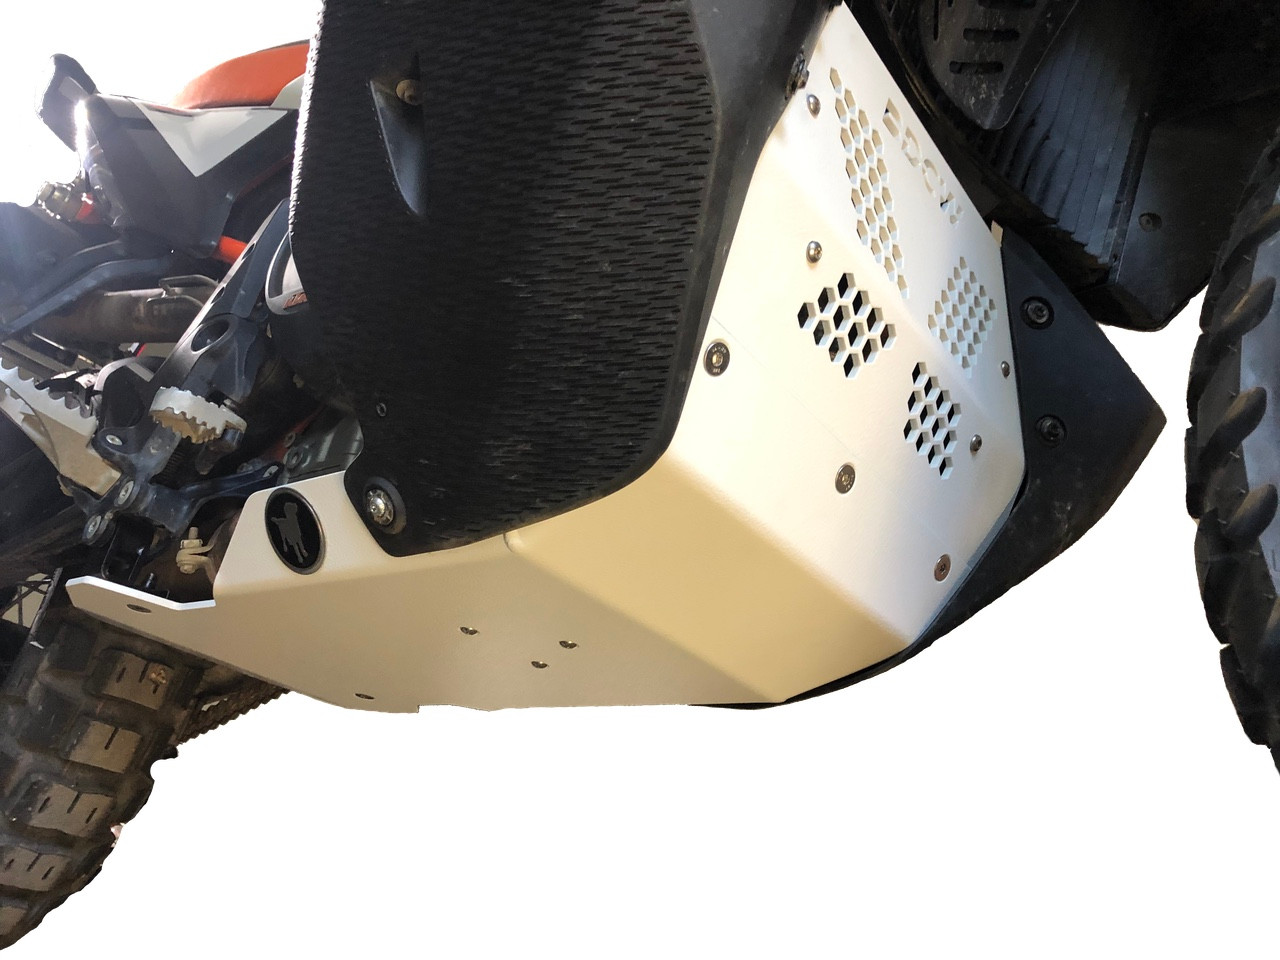 BDCW ULTIMATE SKID PLATE FOR KTM 790/890 ADV and Husqvarna Norden 901